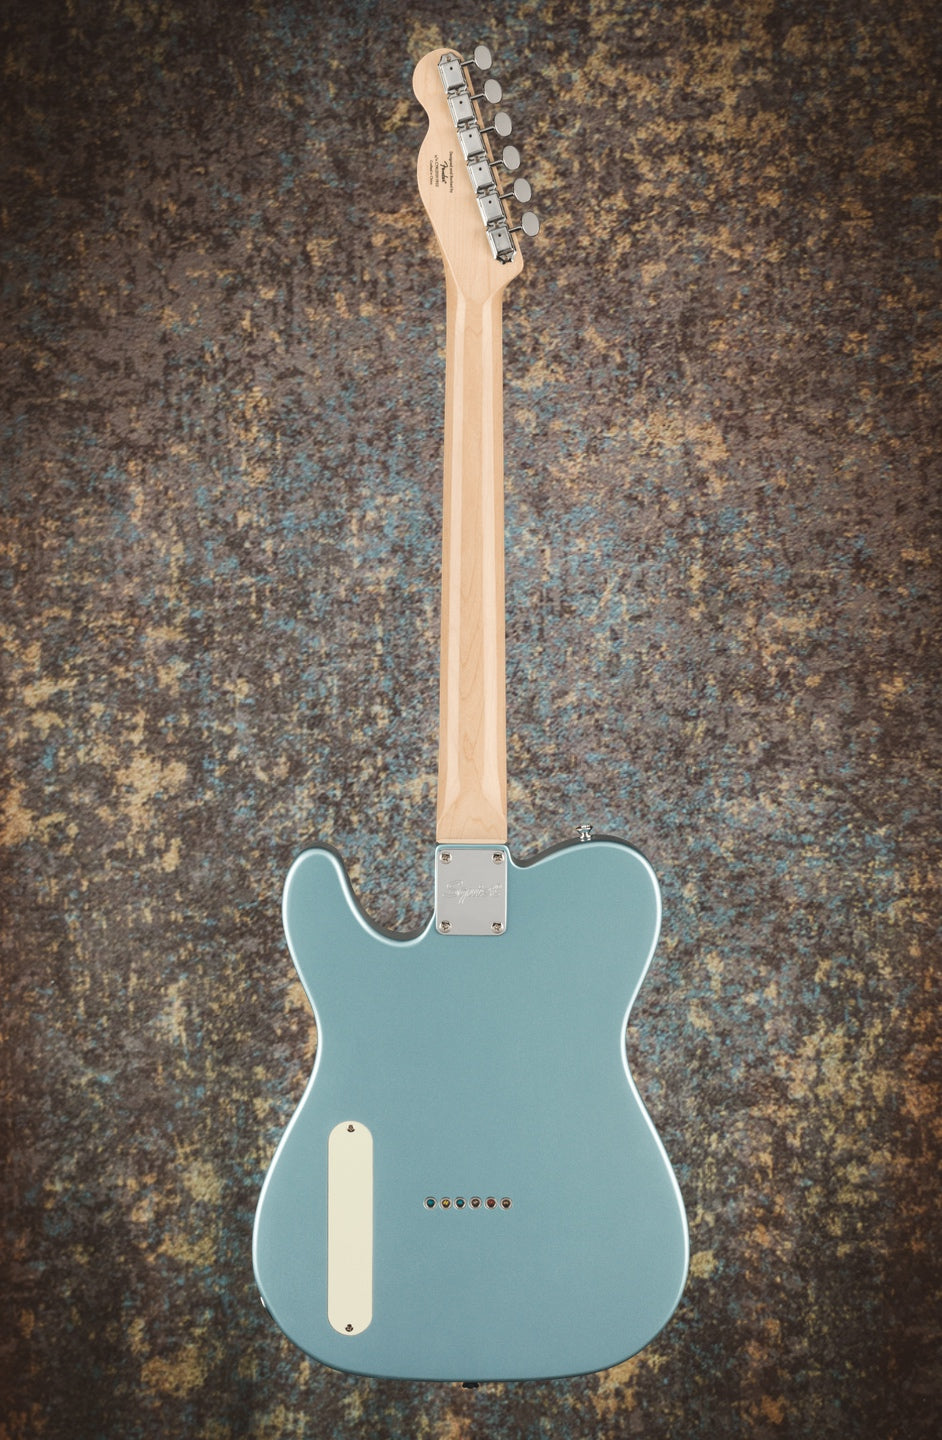 Limited Edition Squier Paranormal Cabronita Telecaster Thinline Ice Blue Metallic